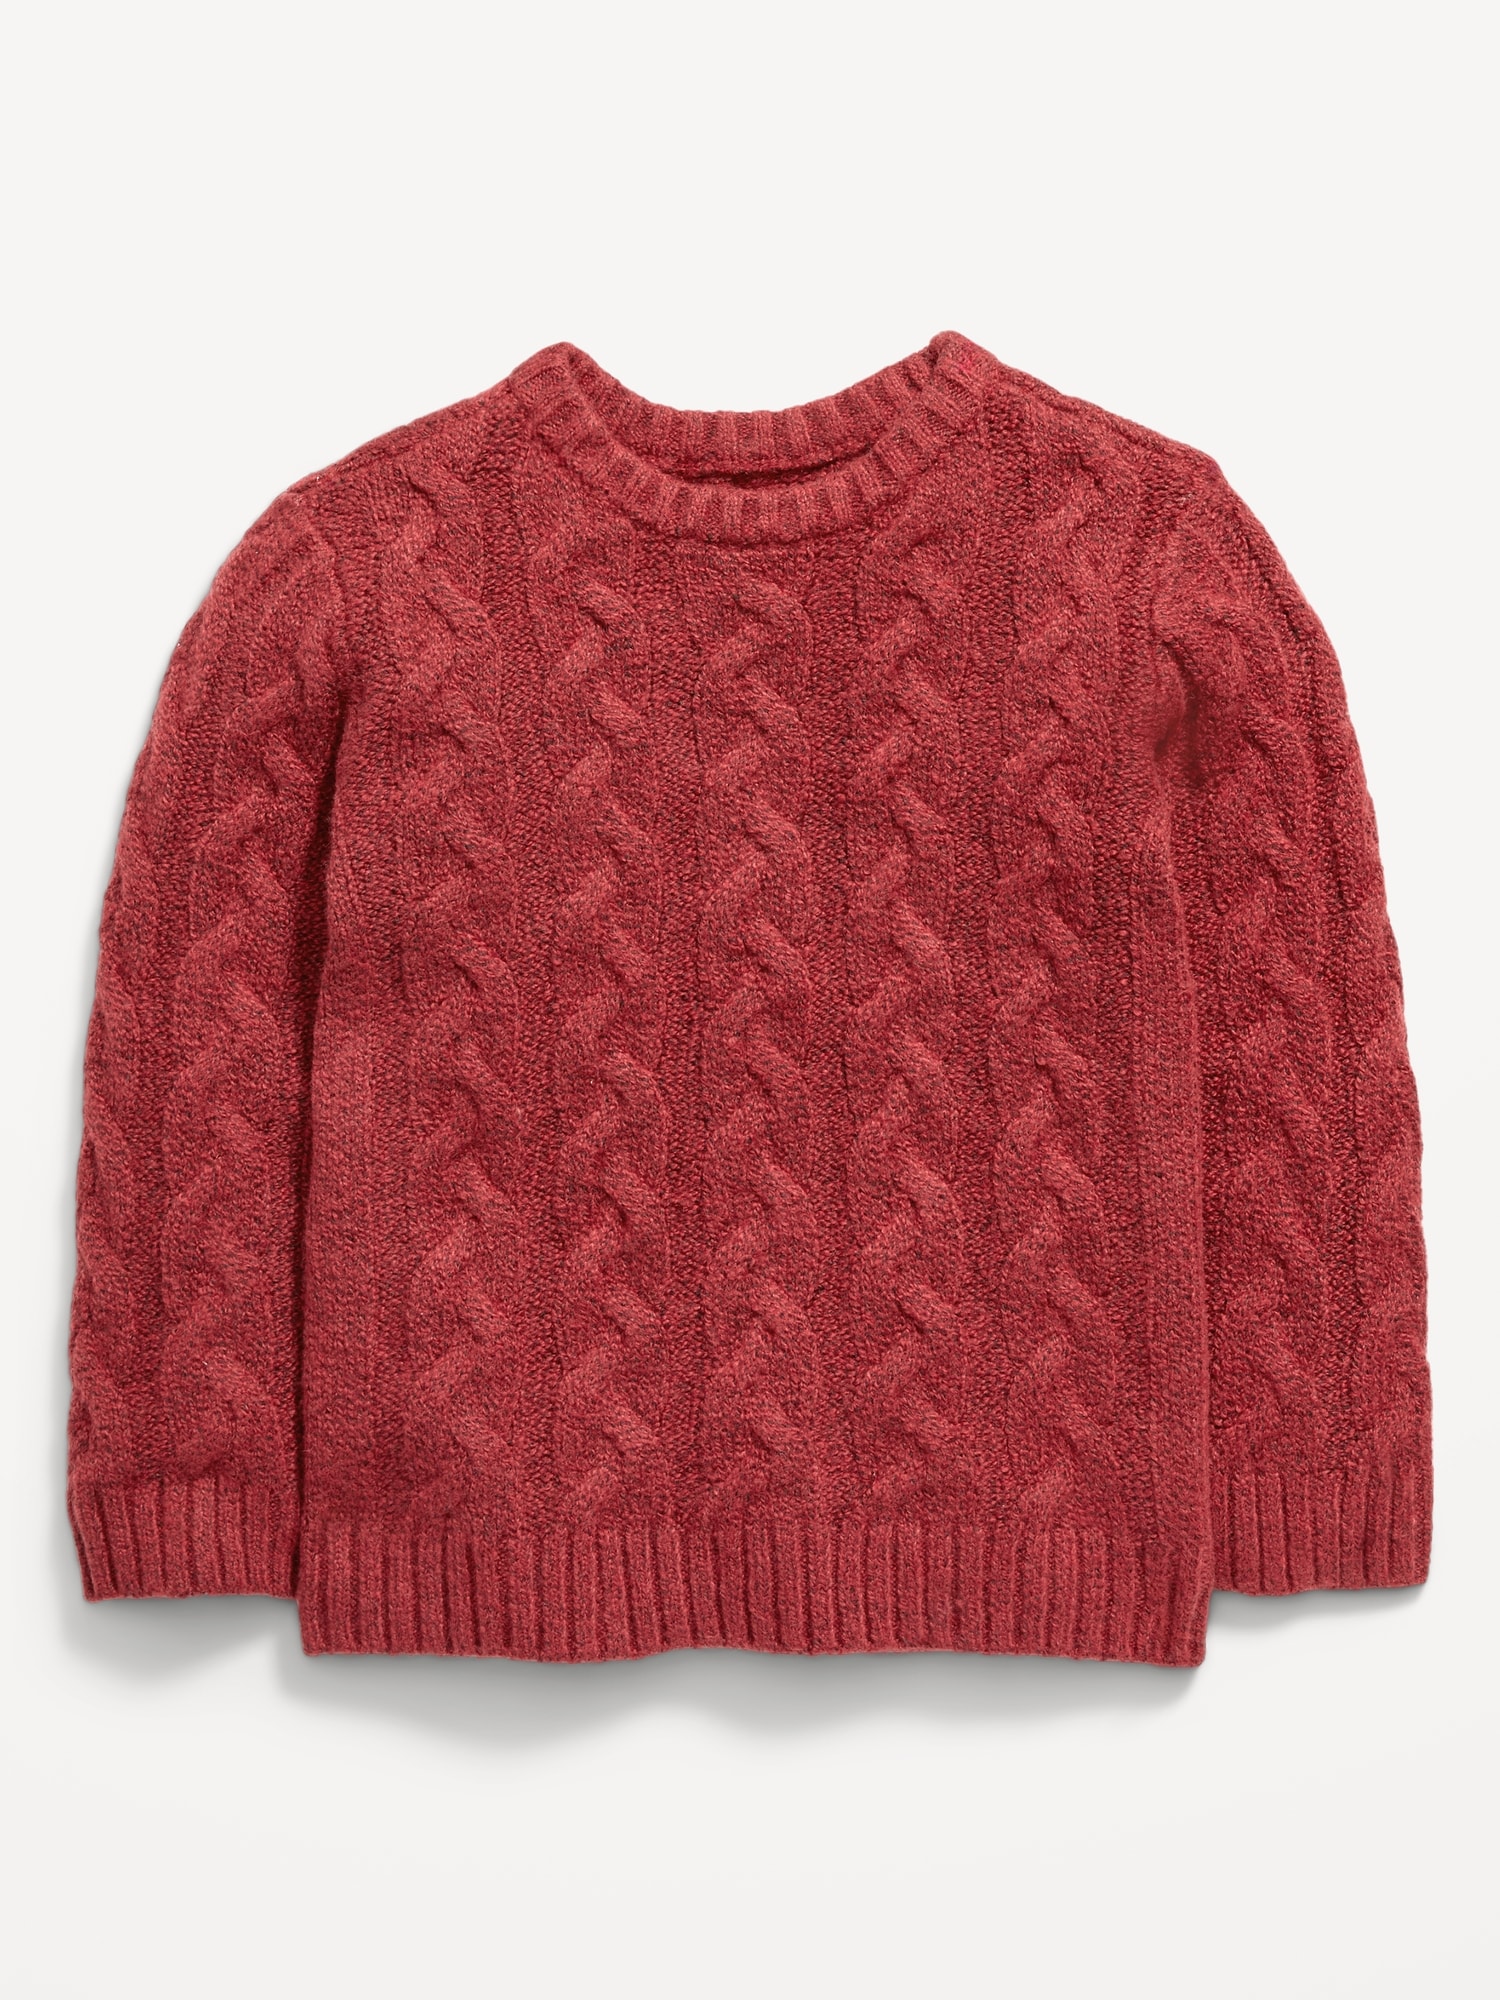 Unisex Cable-Knit Pullover Sweater for Toddler